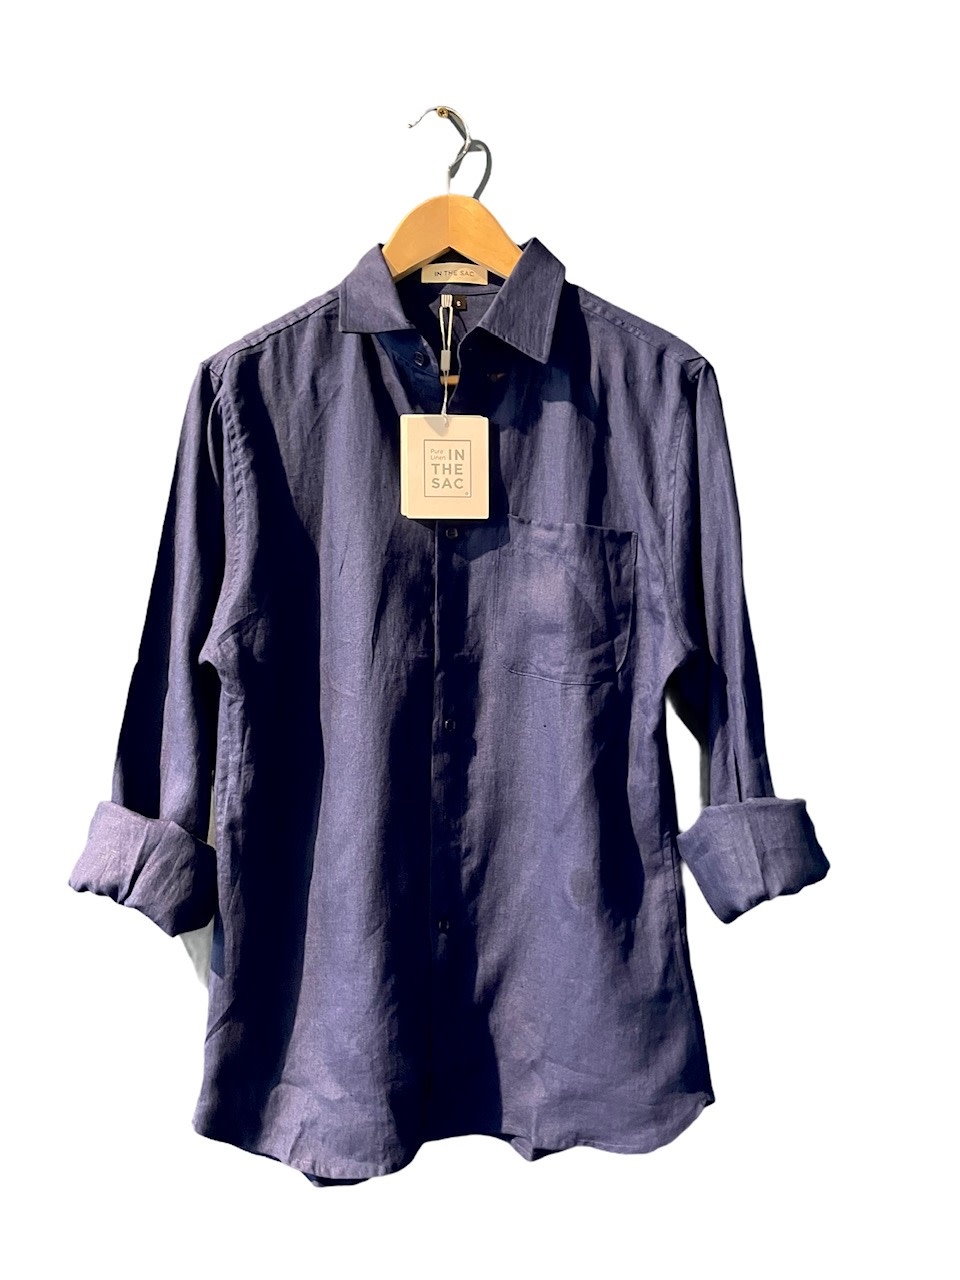 The Linen Shirt - Long Sleeve Slim Fit - Made in Australia with 100% Irish Linen-4